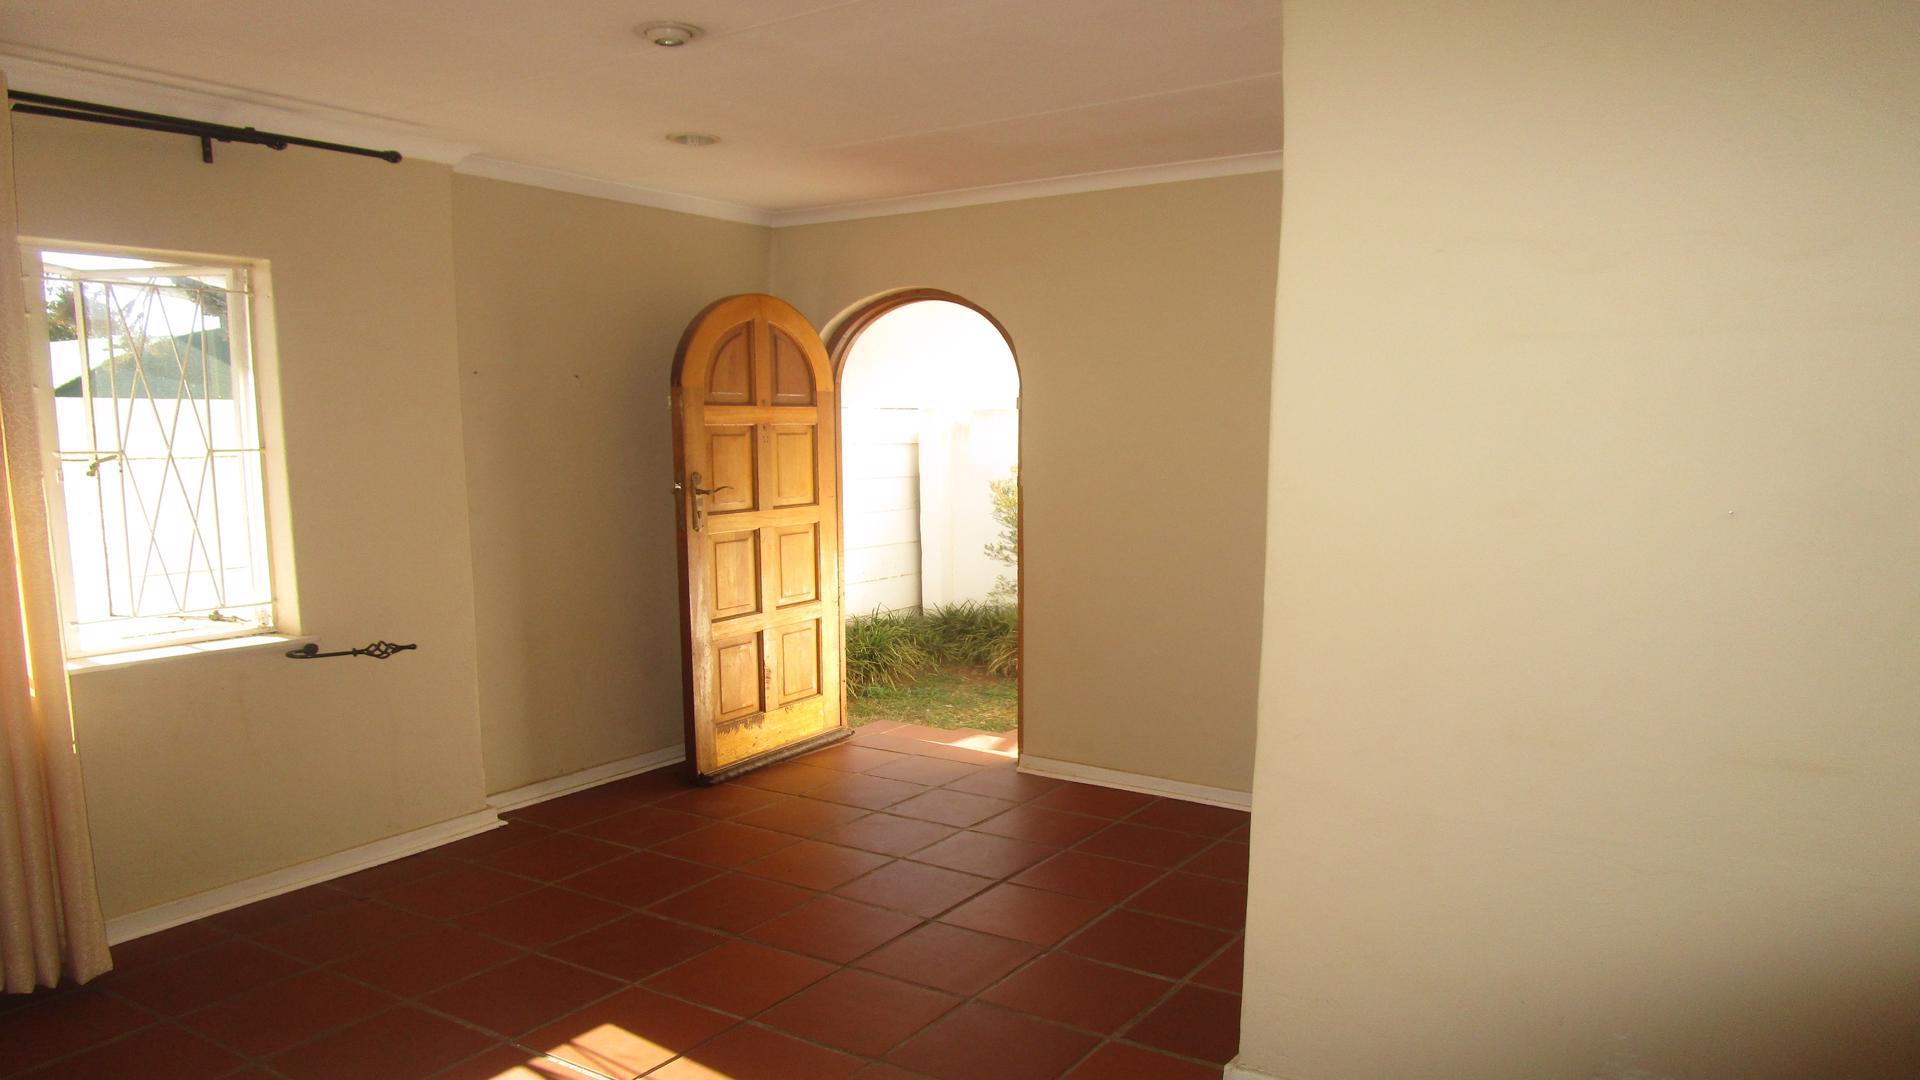 Lounges - 31 square meters of property in Westdene (JHB)